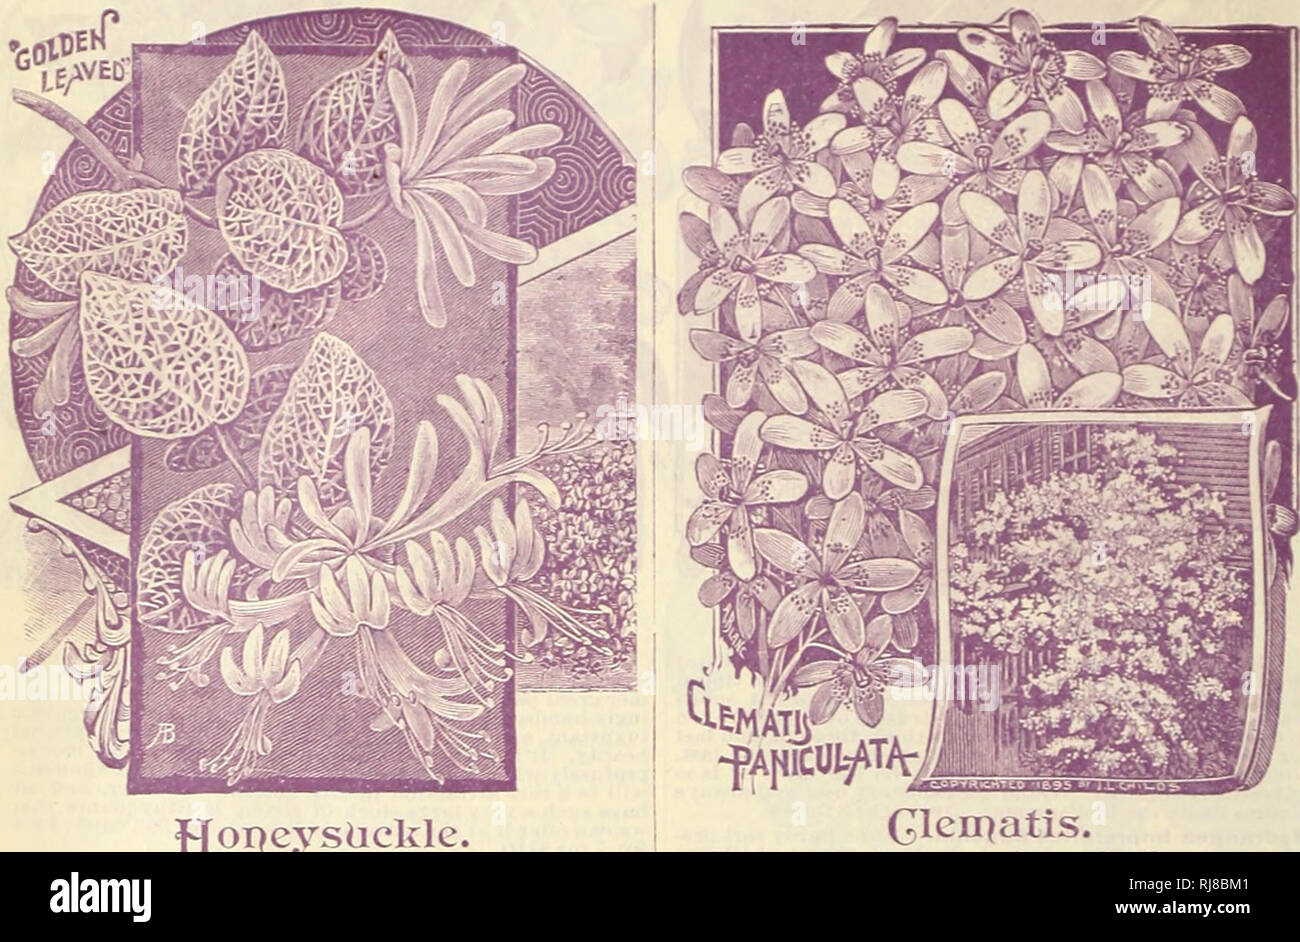 . Childs rare flowers, vegetables, and fruits. Fruit Varieties United States Catalogs; Flowers Varieties United States Catalogs; Vegetables Varieties United States Catalogs; John Lewis Childs (Firm); Fruit; Flowers; Vegetables. ) JOHN LEWIS CHILDS. FLORAL PARK, QUEENS CO., N. Y. Beautiful 4^ardy j^Bowering yInes.. Hopcysiicklc. Clcirjatis. The dear old Honeysuckle is never out of place, at the rich man's mansion or the poor man's cottage. For a cheap, hardy, robust, yet lovely vine, it is the chief stand-by. Blowers exceedingly beautiful and very fragrant. *uch6ia Flowered. Large clusters of l Stock Photo